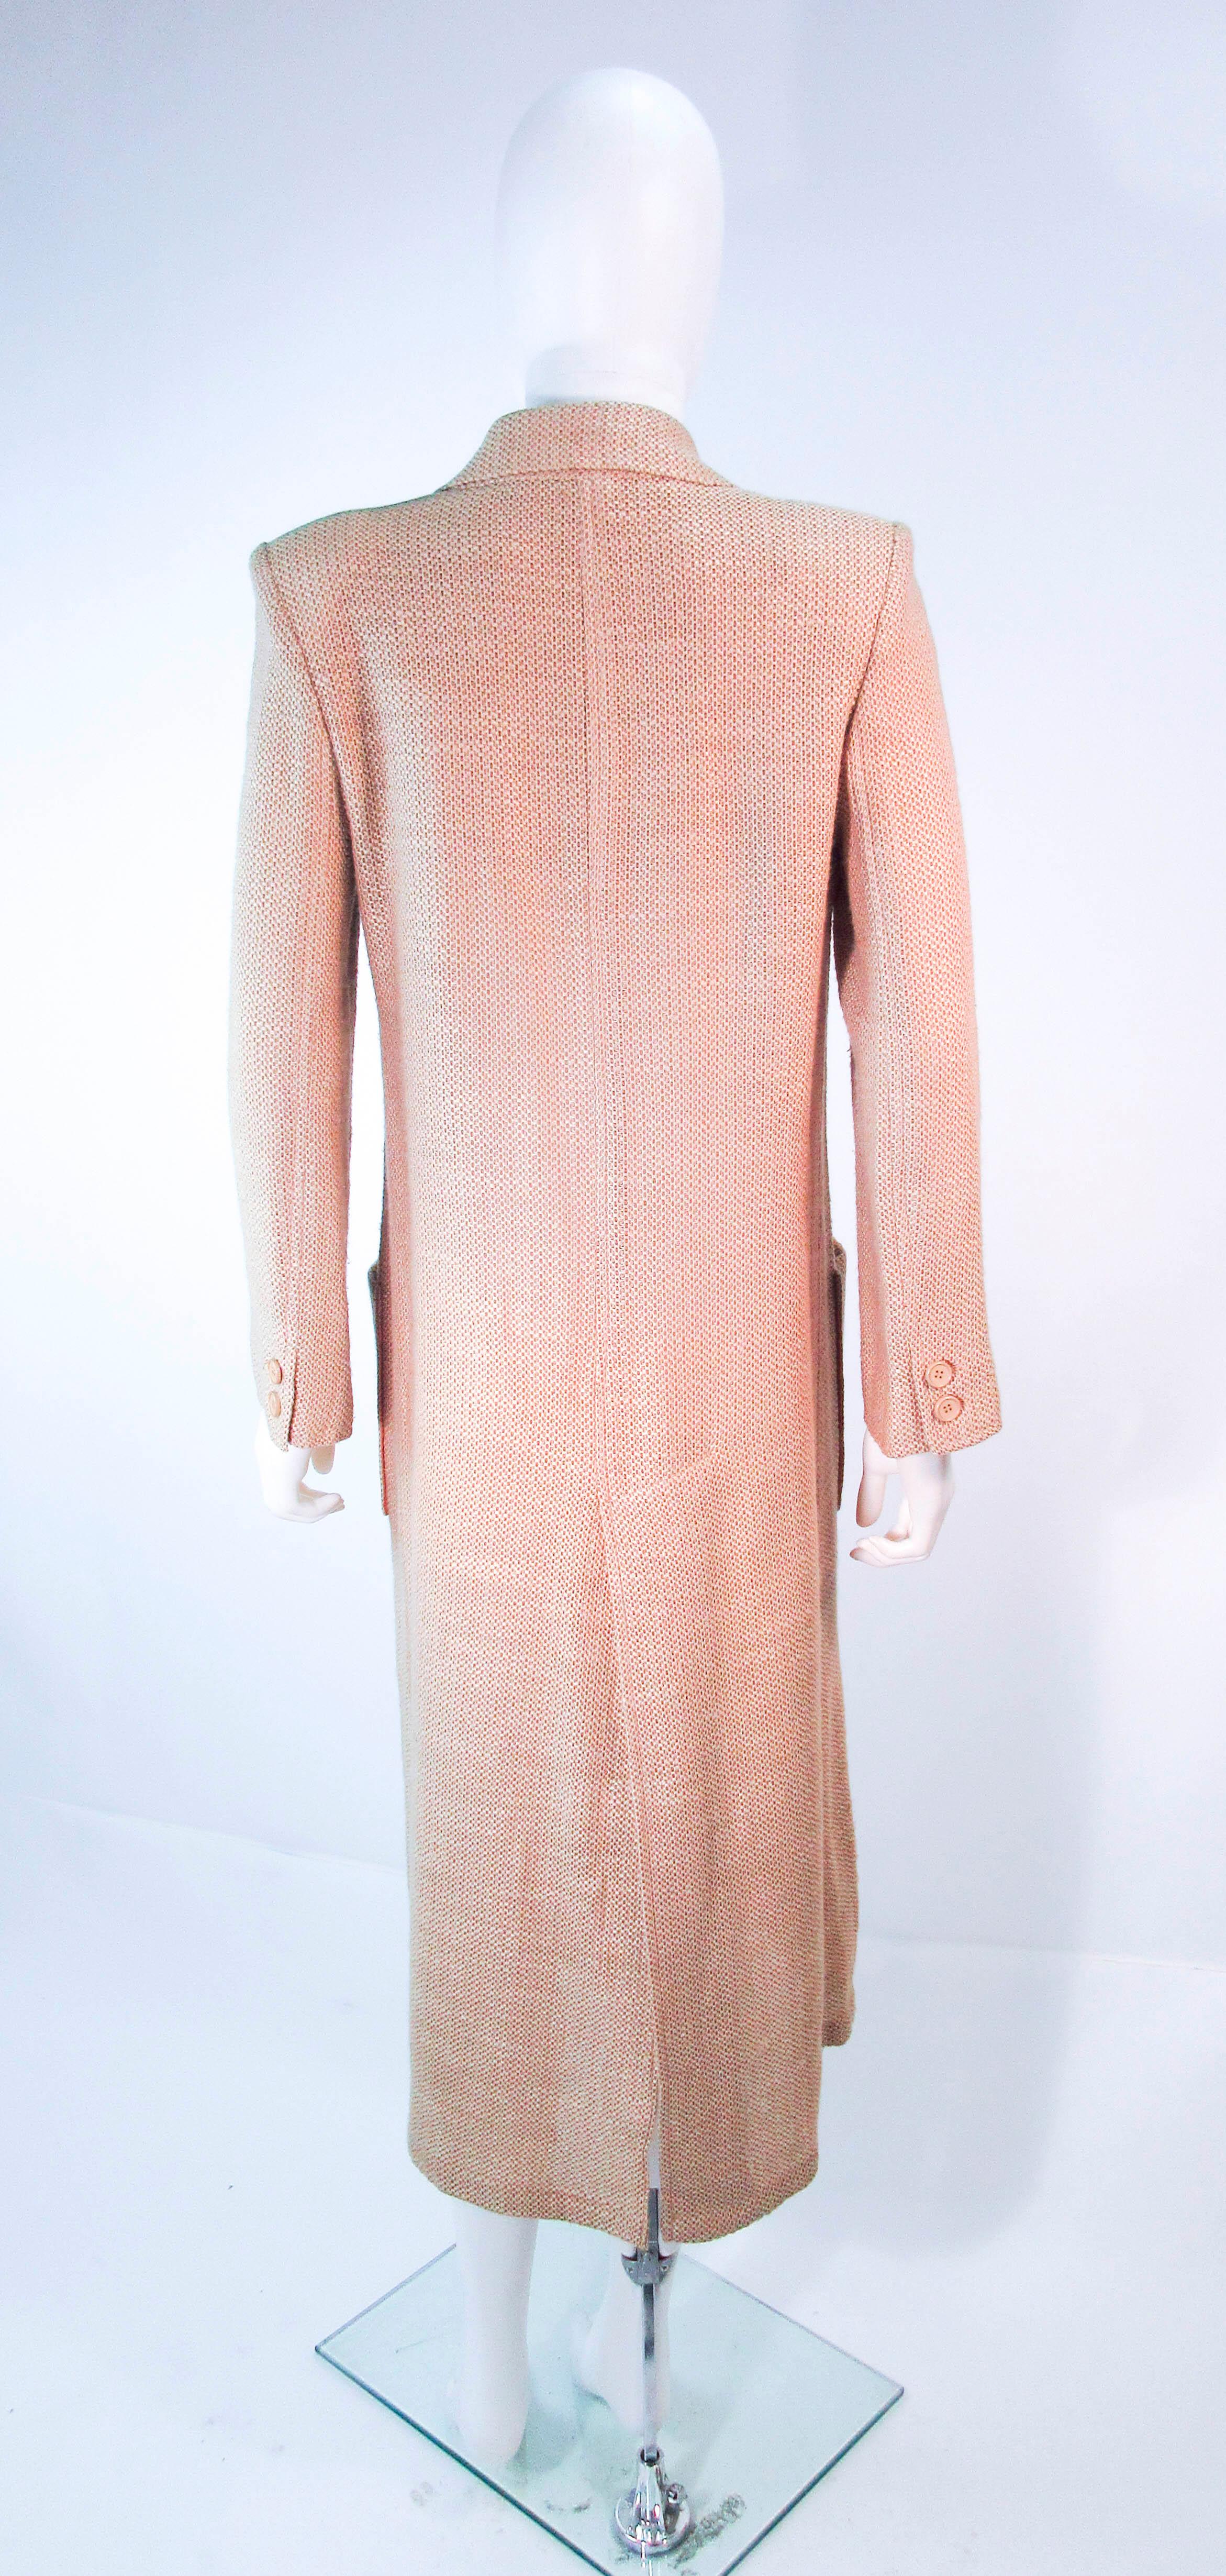 VALENTINO Vintage 1970's Beige and Tan Tweed Long Coat Size 10 5